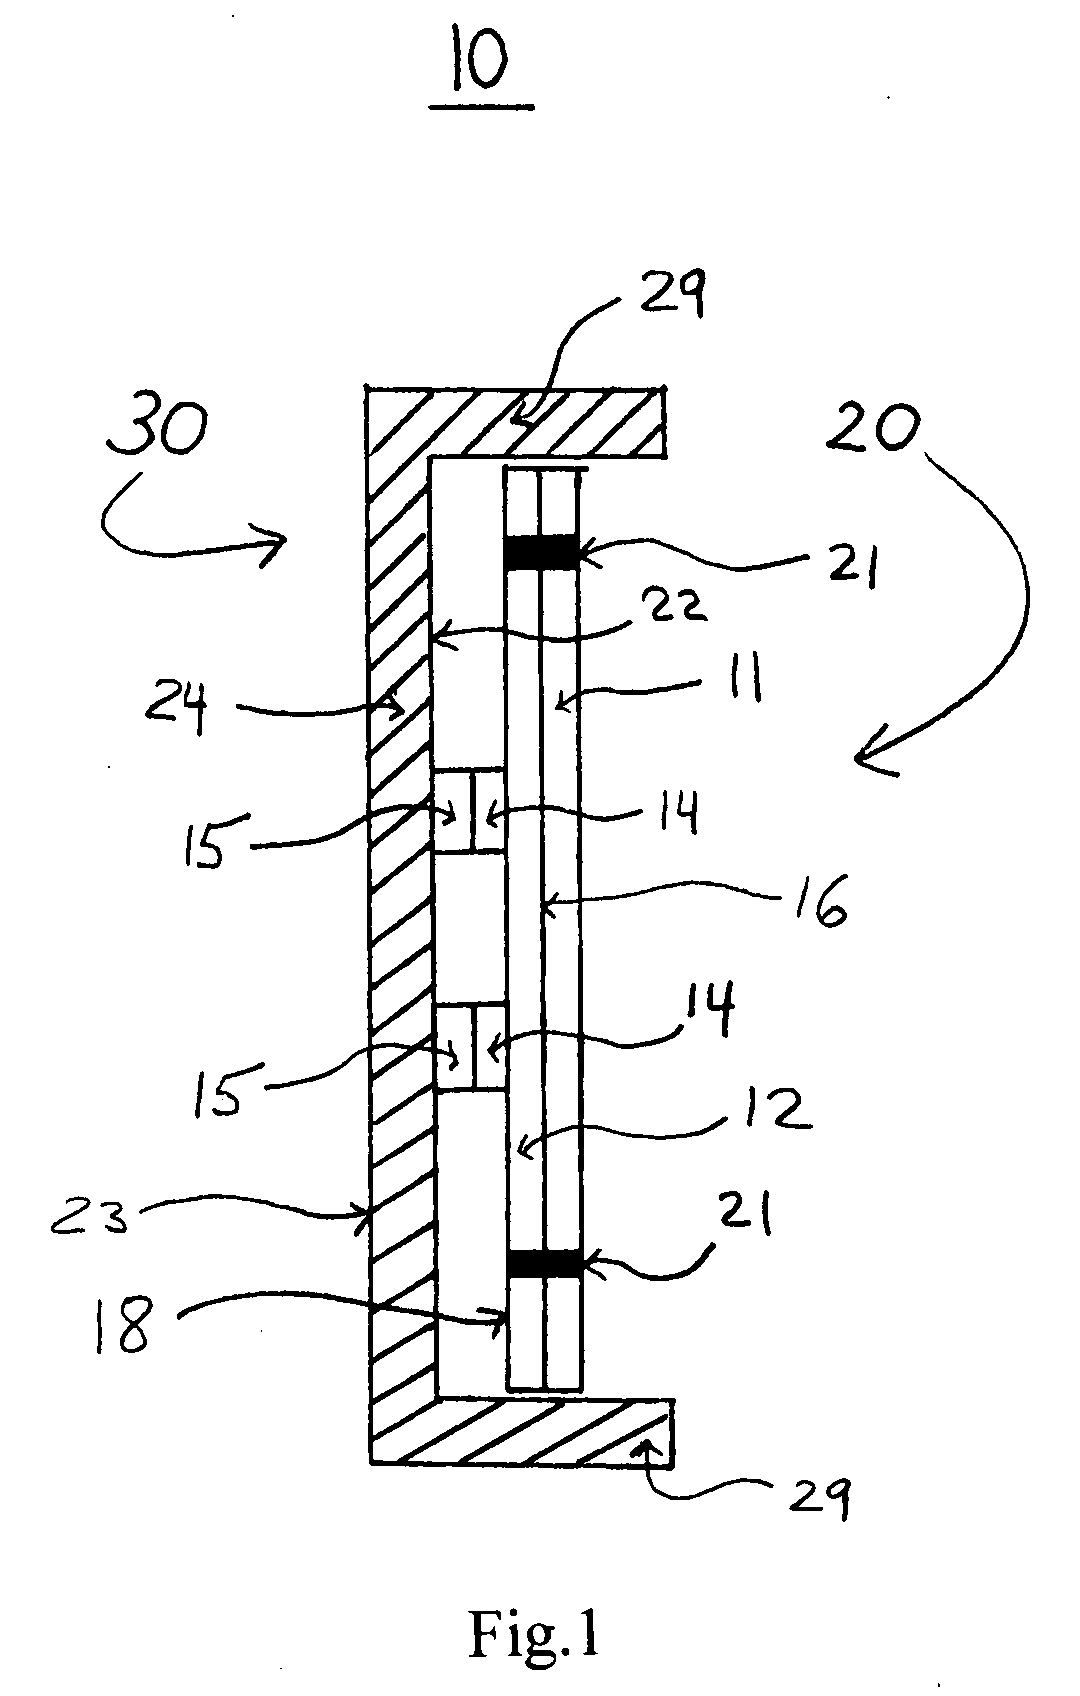 Front-loading display system